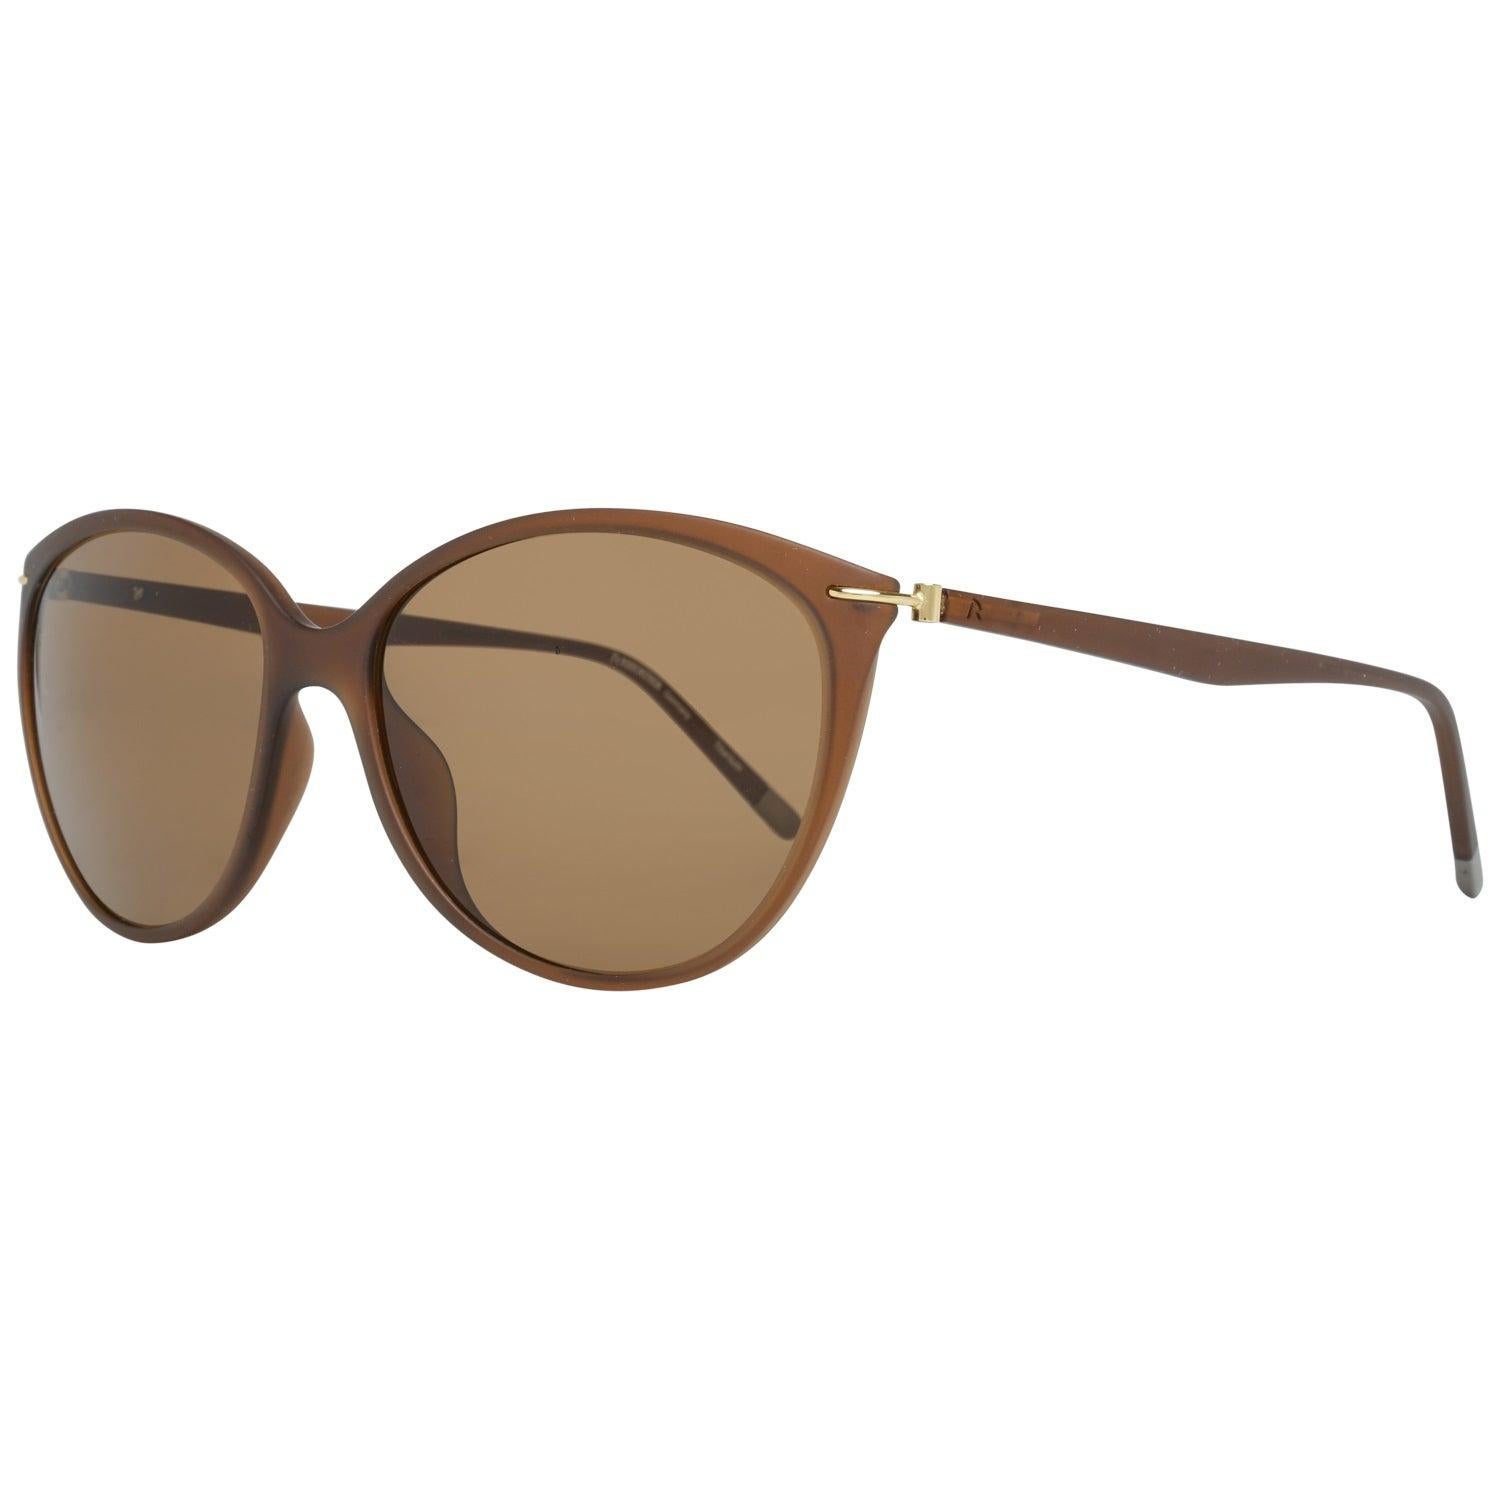 Details
MATERIAL: Titanium
COLOR: Brown
MODEL: R7412 B 57
GENDER: Women
COUNTRY OF MANUFACTURE: China
TYPE: Sunglasses
ORIGINAL CASE?: Yes
STYLE: Oval
OCCASION: Casual
FEATURES: Lightweight
LENS COLOR: Brown
LENS TECHNOLOGY: No Extra
YEAR